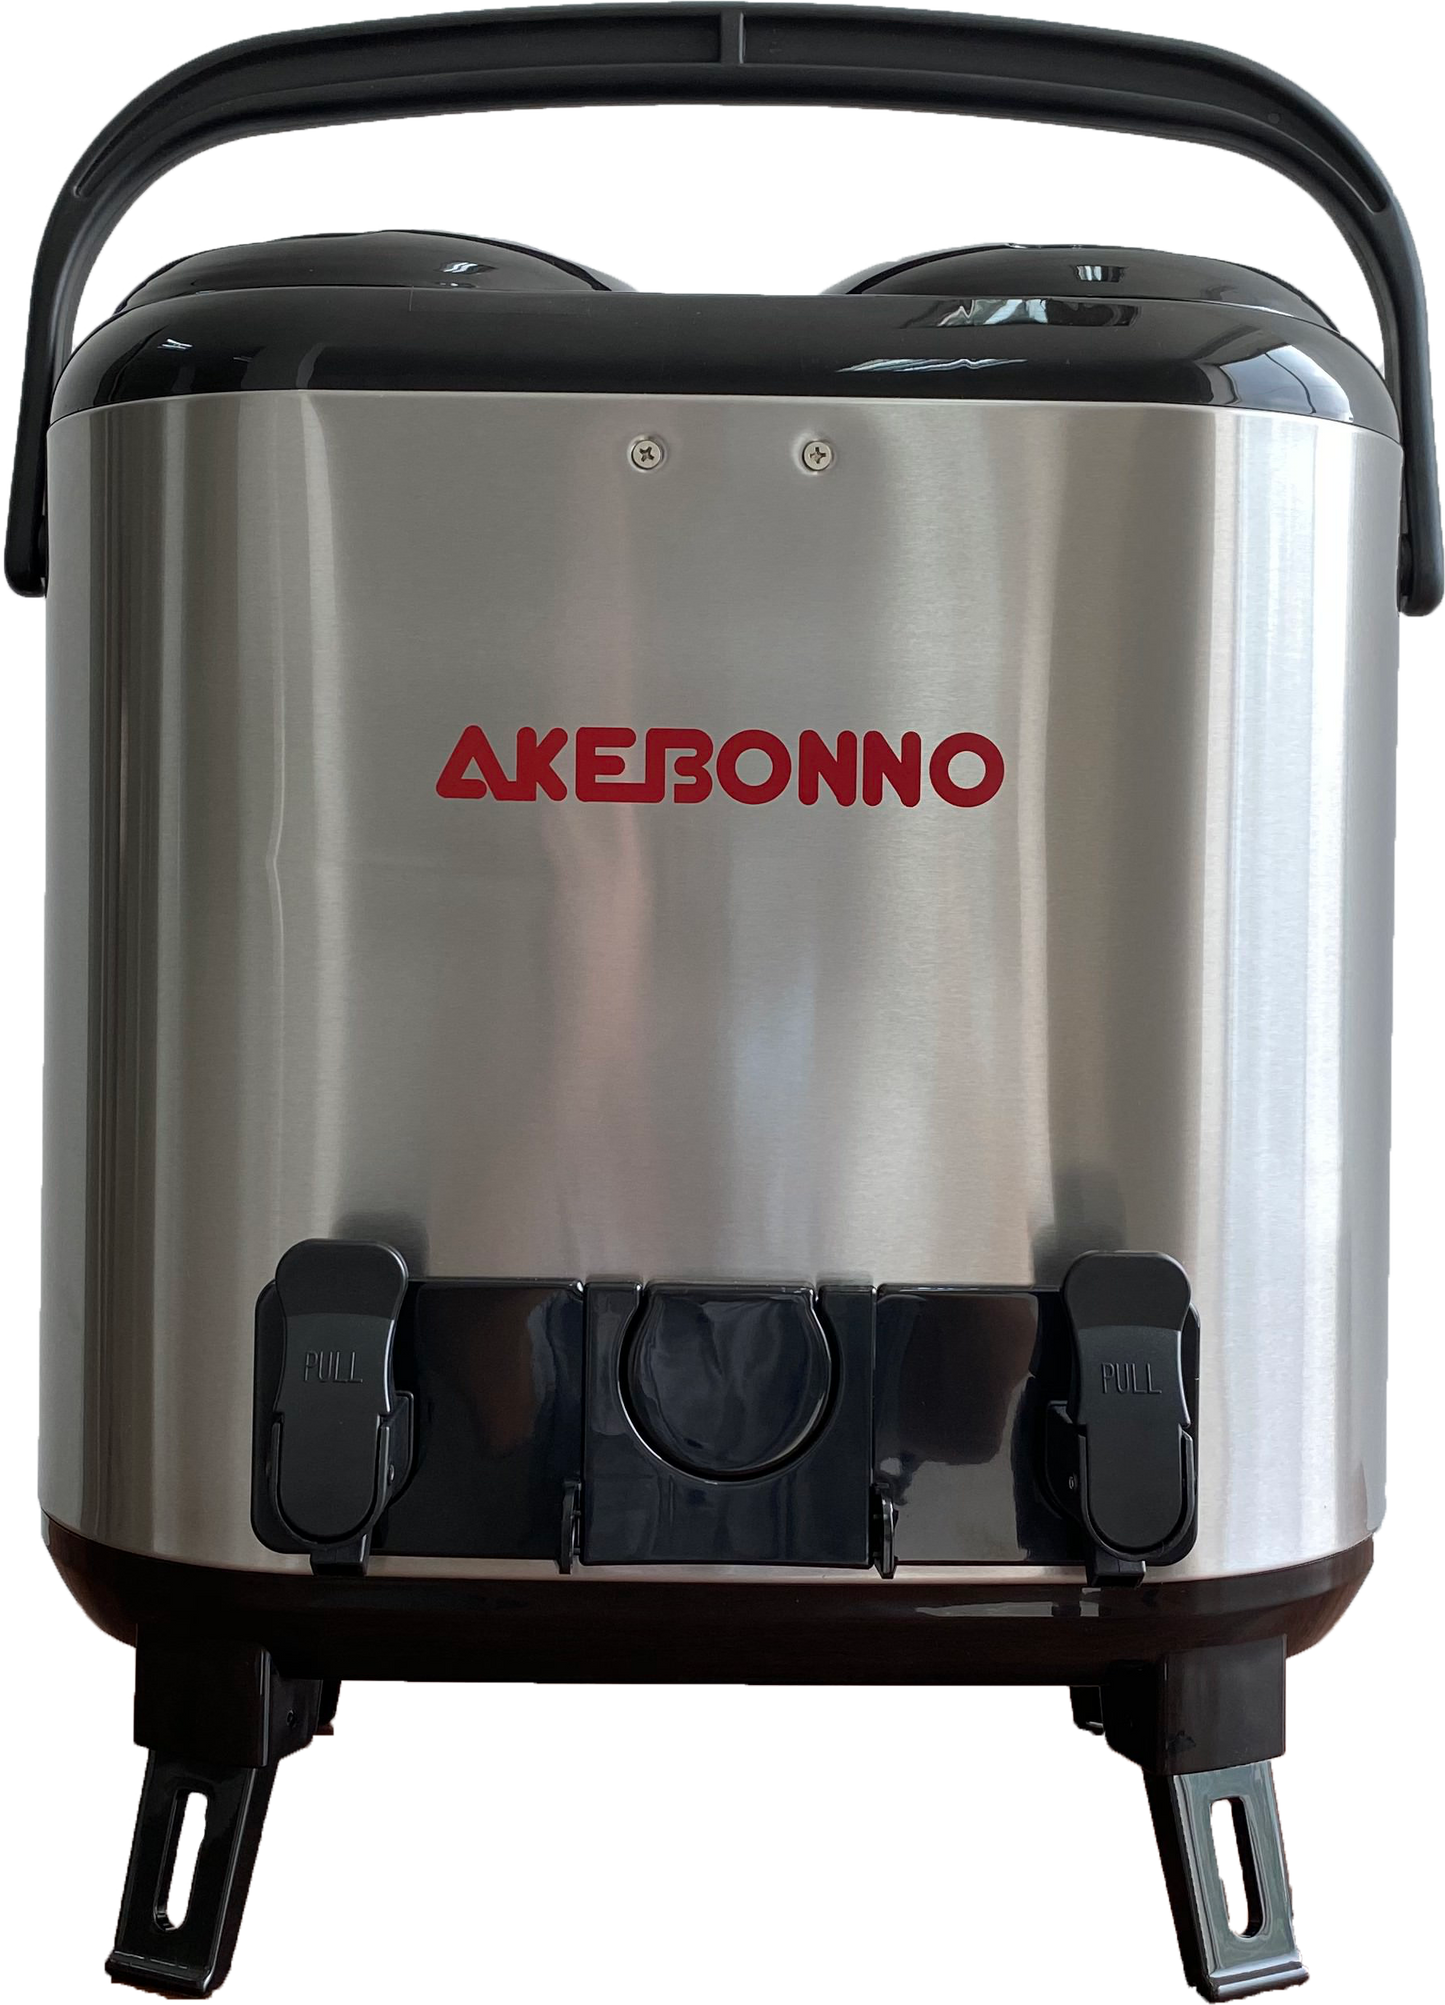 AKEBONNO WATER JUG / THERMOS BESAR DOUBLE TANK & TAP